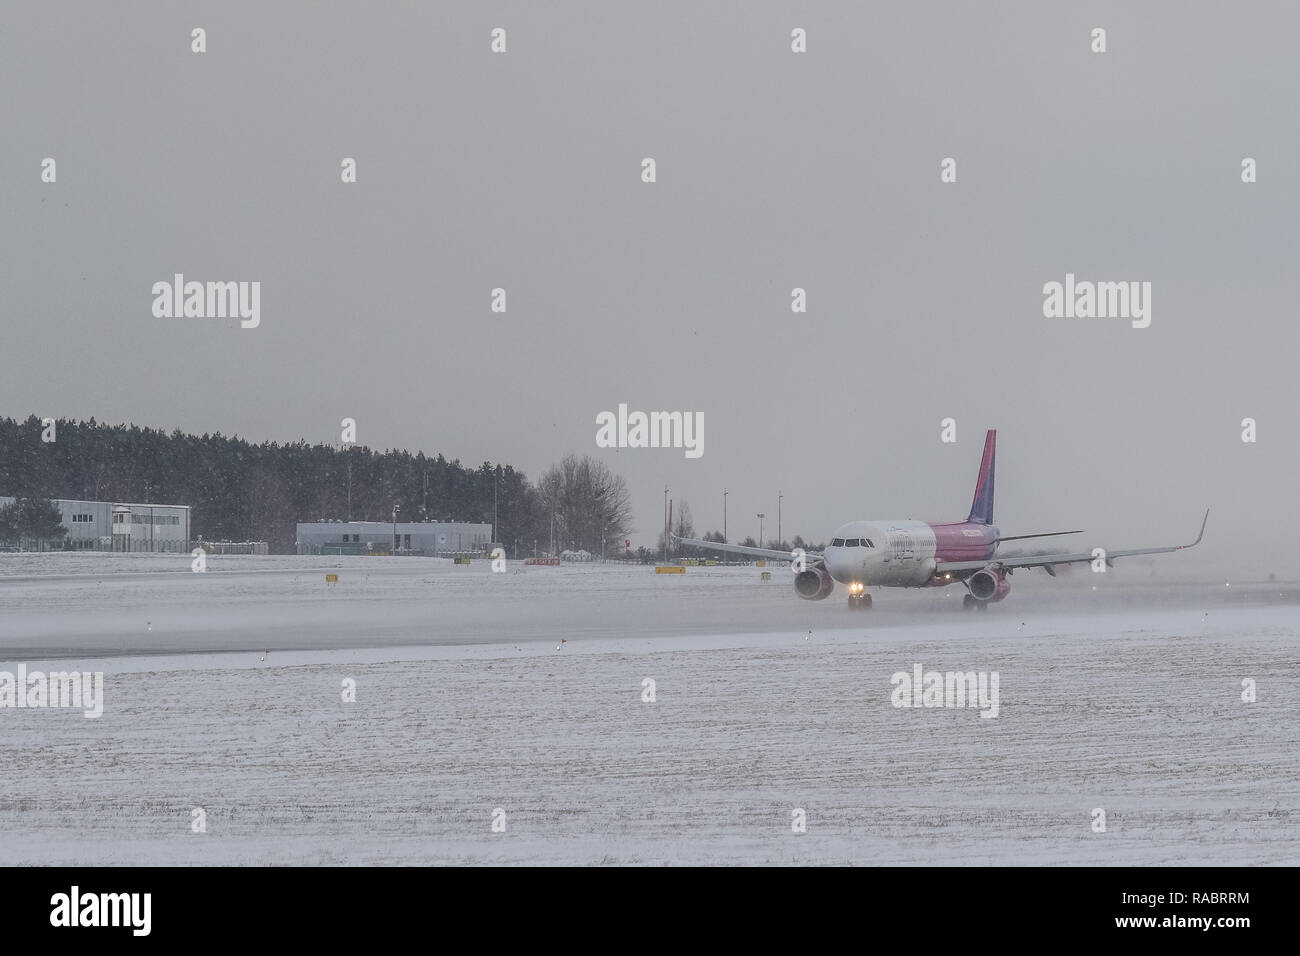 Gdansk, Poland 3rd. January 2019 HA-LXM Wizz Air Airbus A321-231 taking-off  during the snowfall at Gdansk Lech Walesa airport is seen © Max Ardulf /  Alamy Live News Stock Photo - Alamy